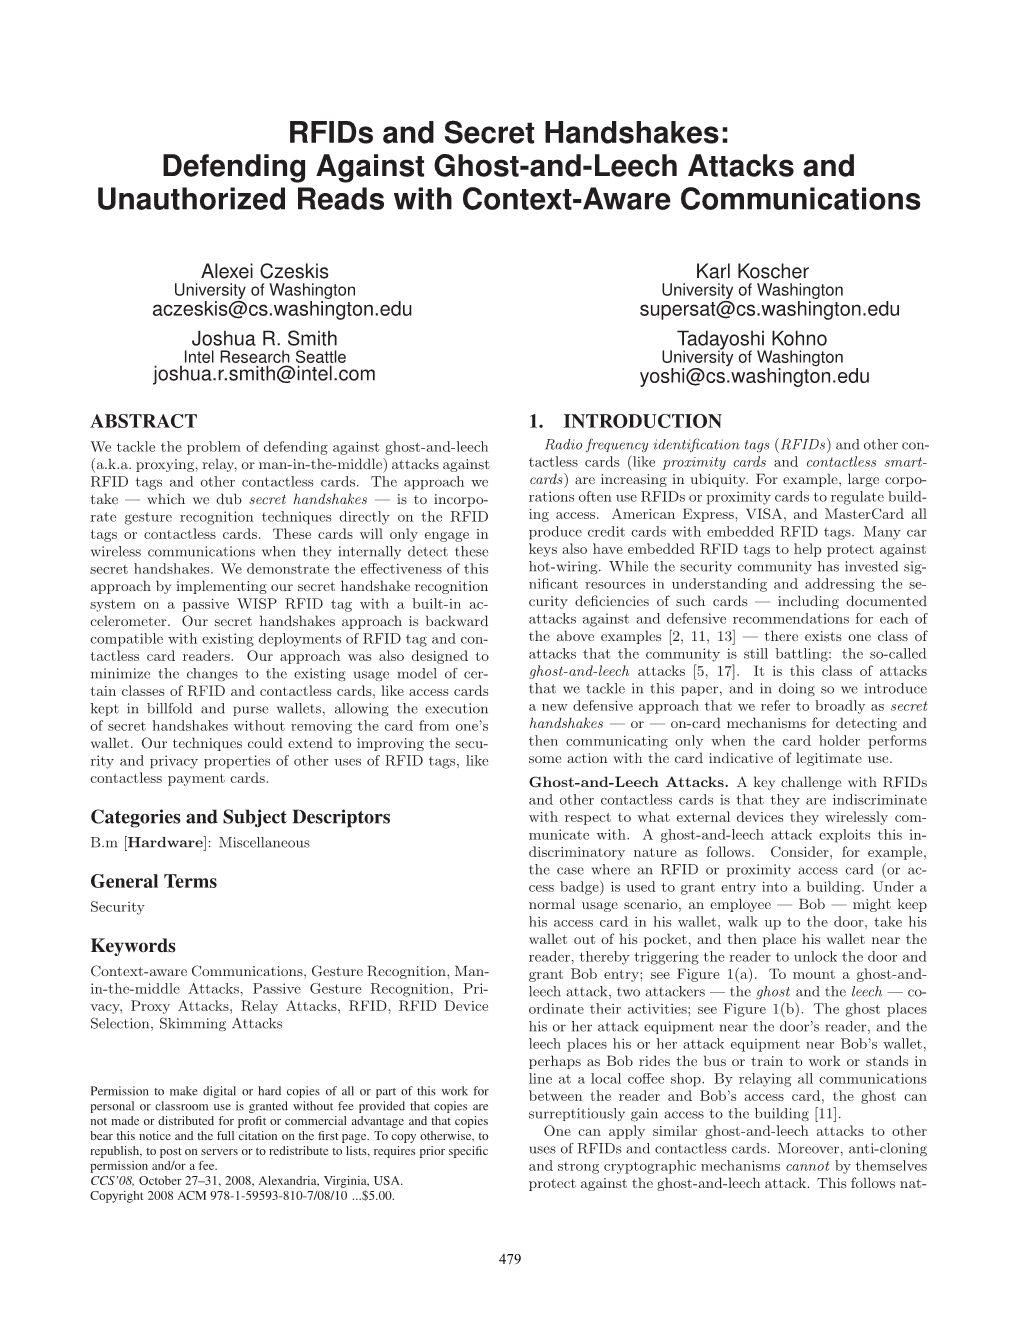 Rfids and Secret Handshakes: Defending Against Ghost-And-Leech Attacks and Unauthorized Reads with Context-Aware Communications